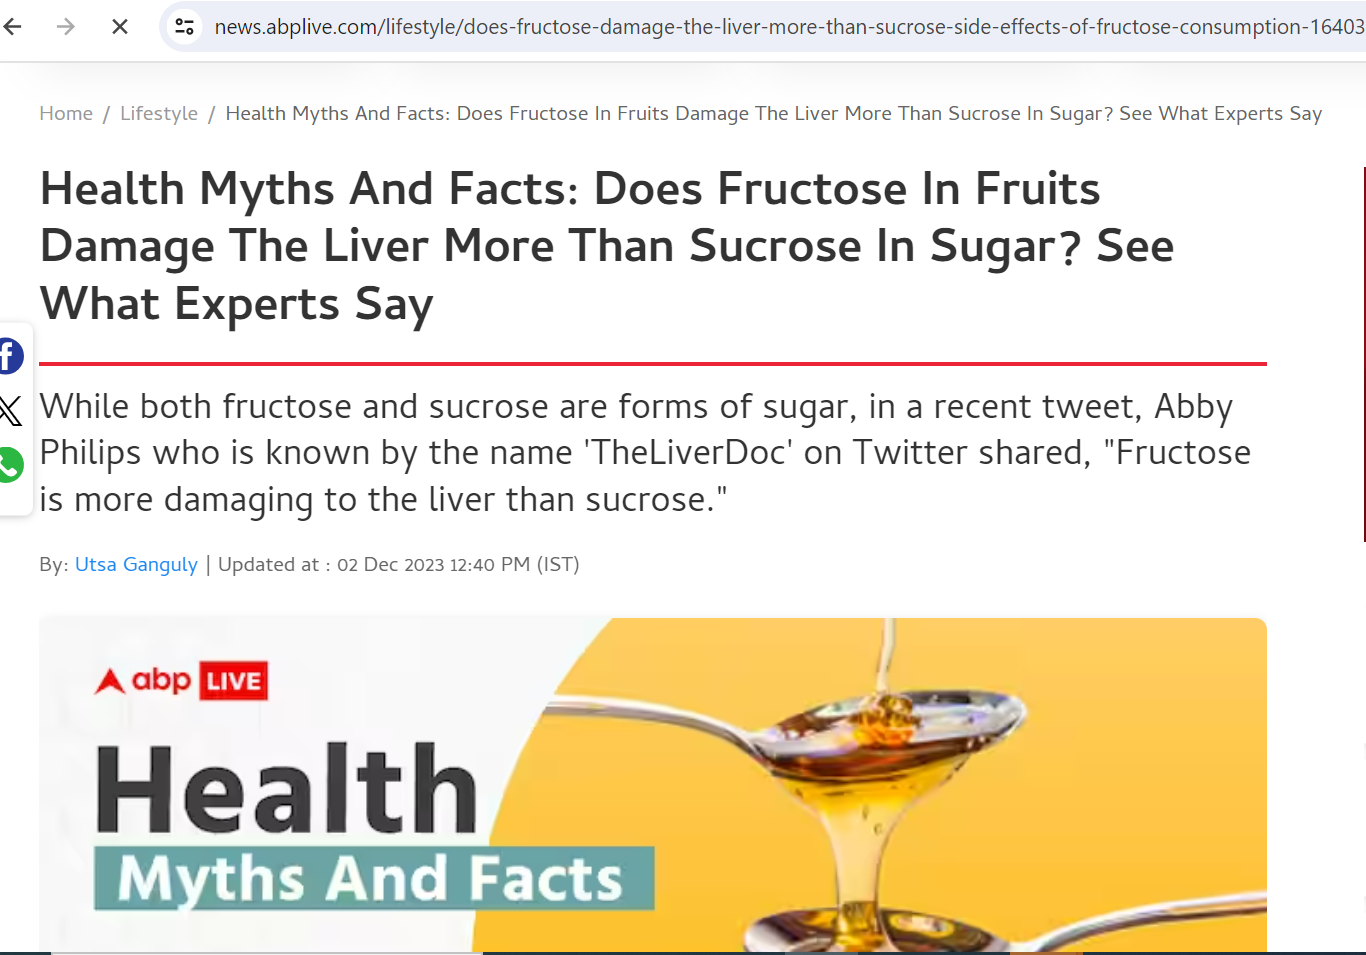 Health Myths And Facts: Does Fructose In Fruits Damage The Liver More Than Sucrose In Sugar? See What Experts Say